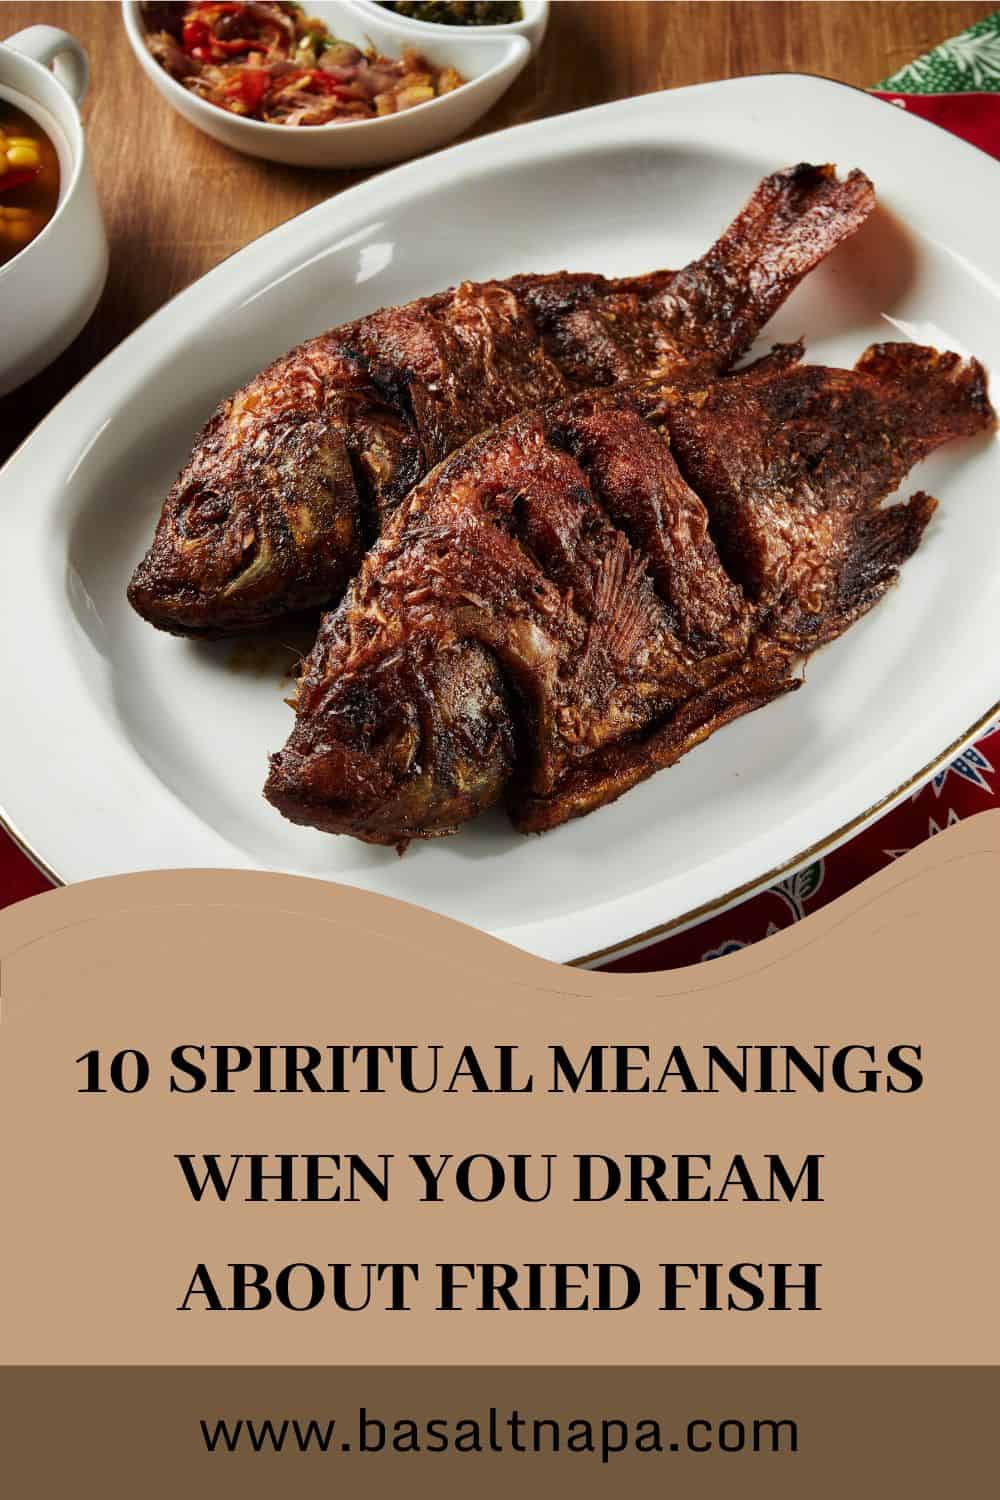 What Does It Mean To Dream Of Fried Fish?